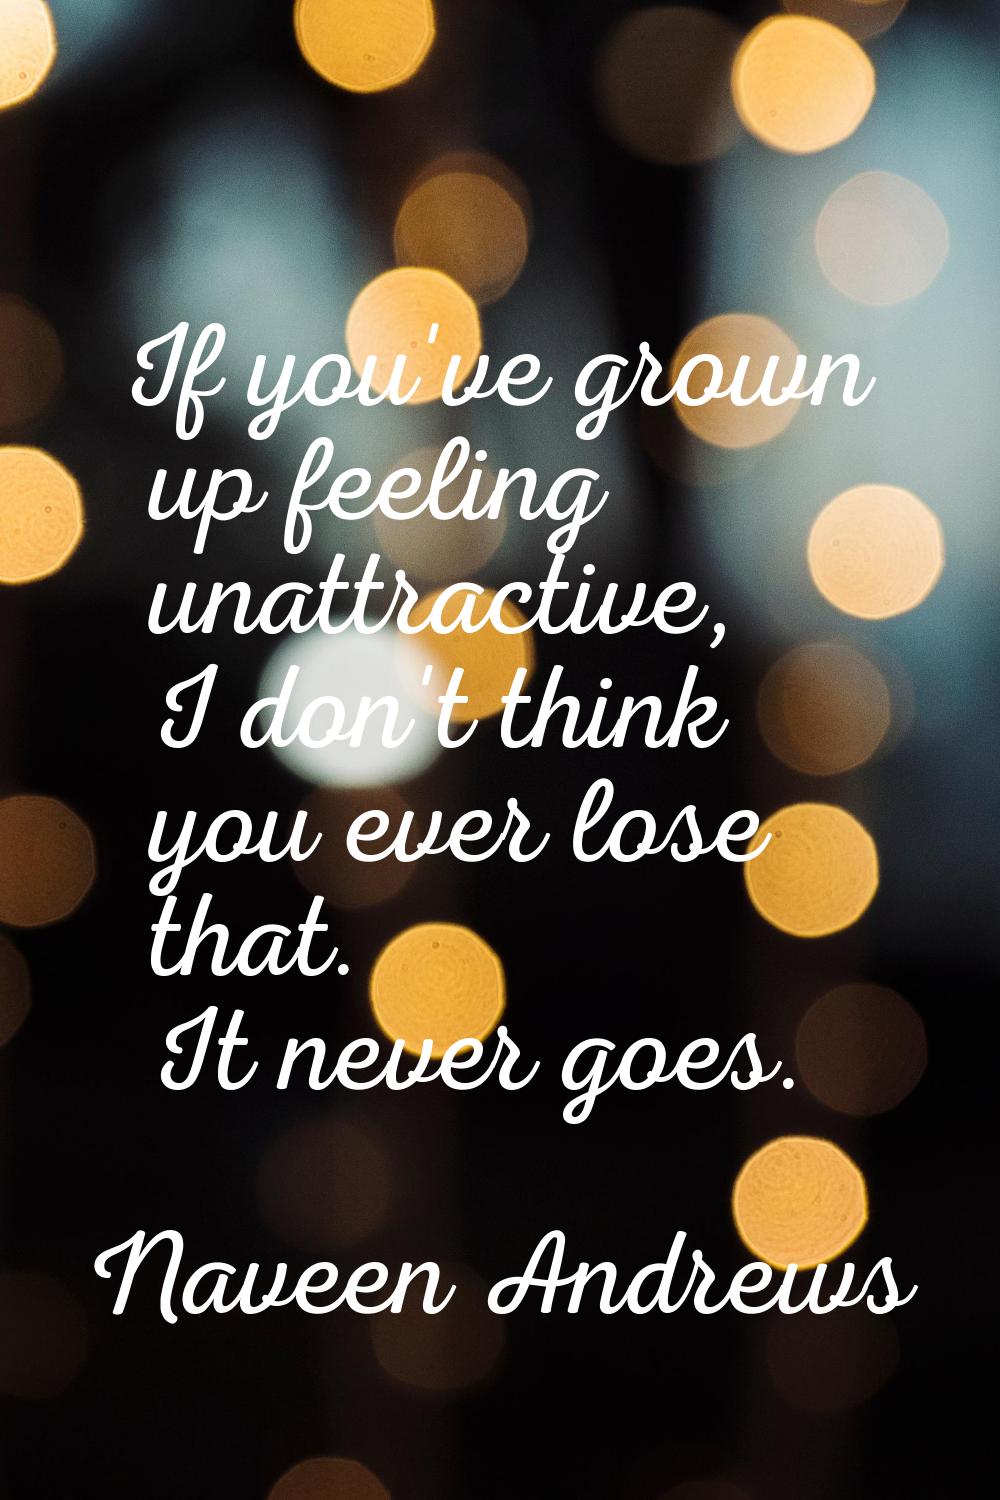 If you've grown up feeling unattractive, I don't think you ever lose that. It never goes.